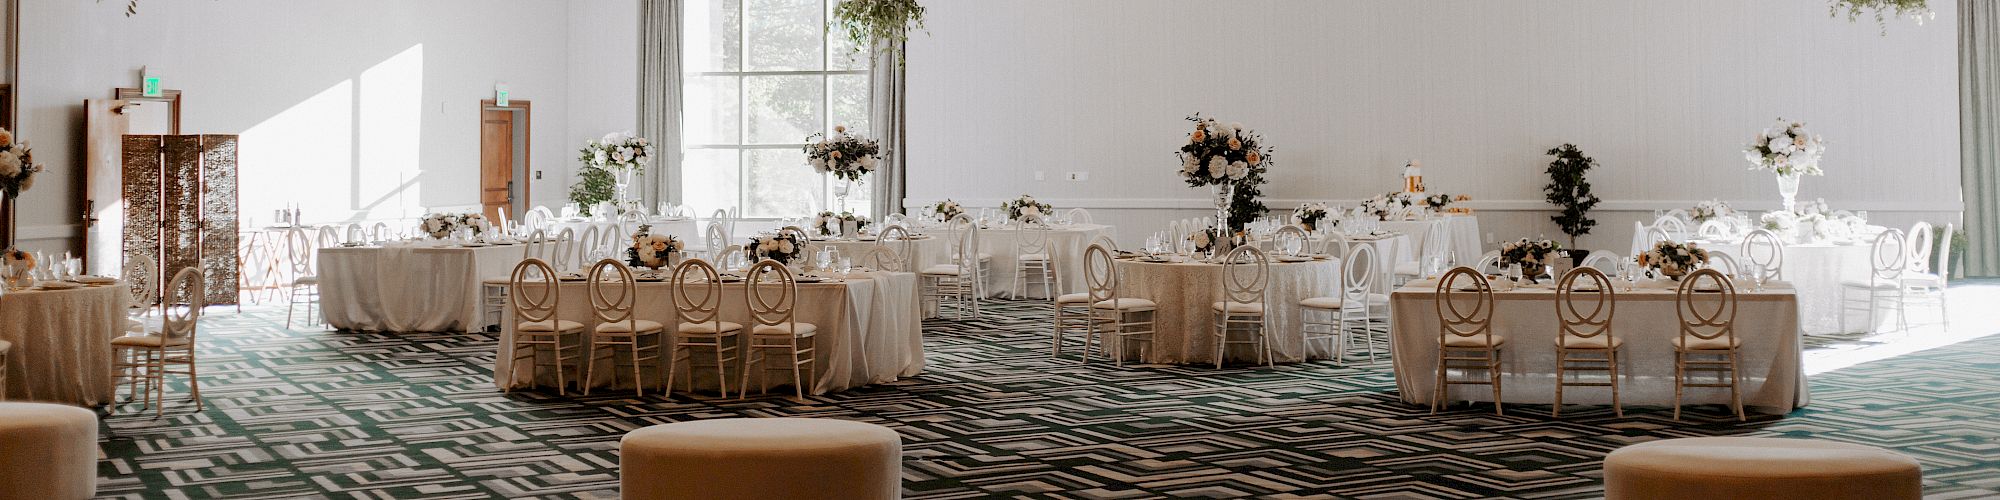 This image shows an elegant event hall setup with round tables and chairs, white drapery, floral centerpieces, and soft lighting.